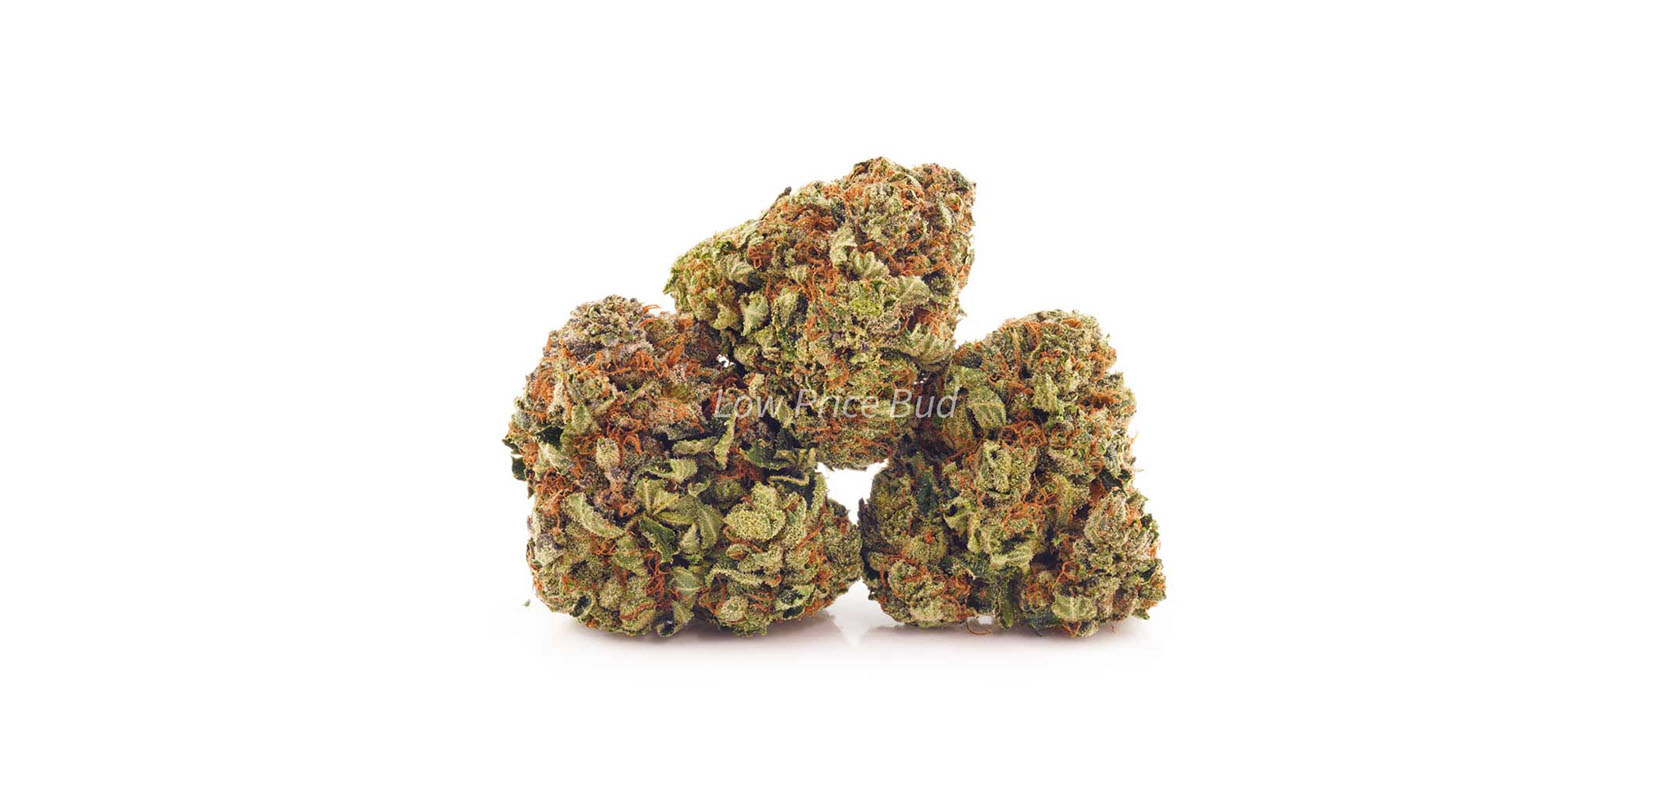 Ice Gas weed online Canada at BC cannabis dispensary for value buds Low Price Bud. Buy online weeds. order weed online canada. cheap budz. cheap cannabis.